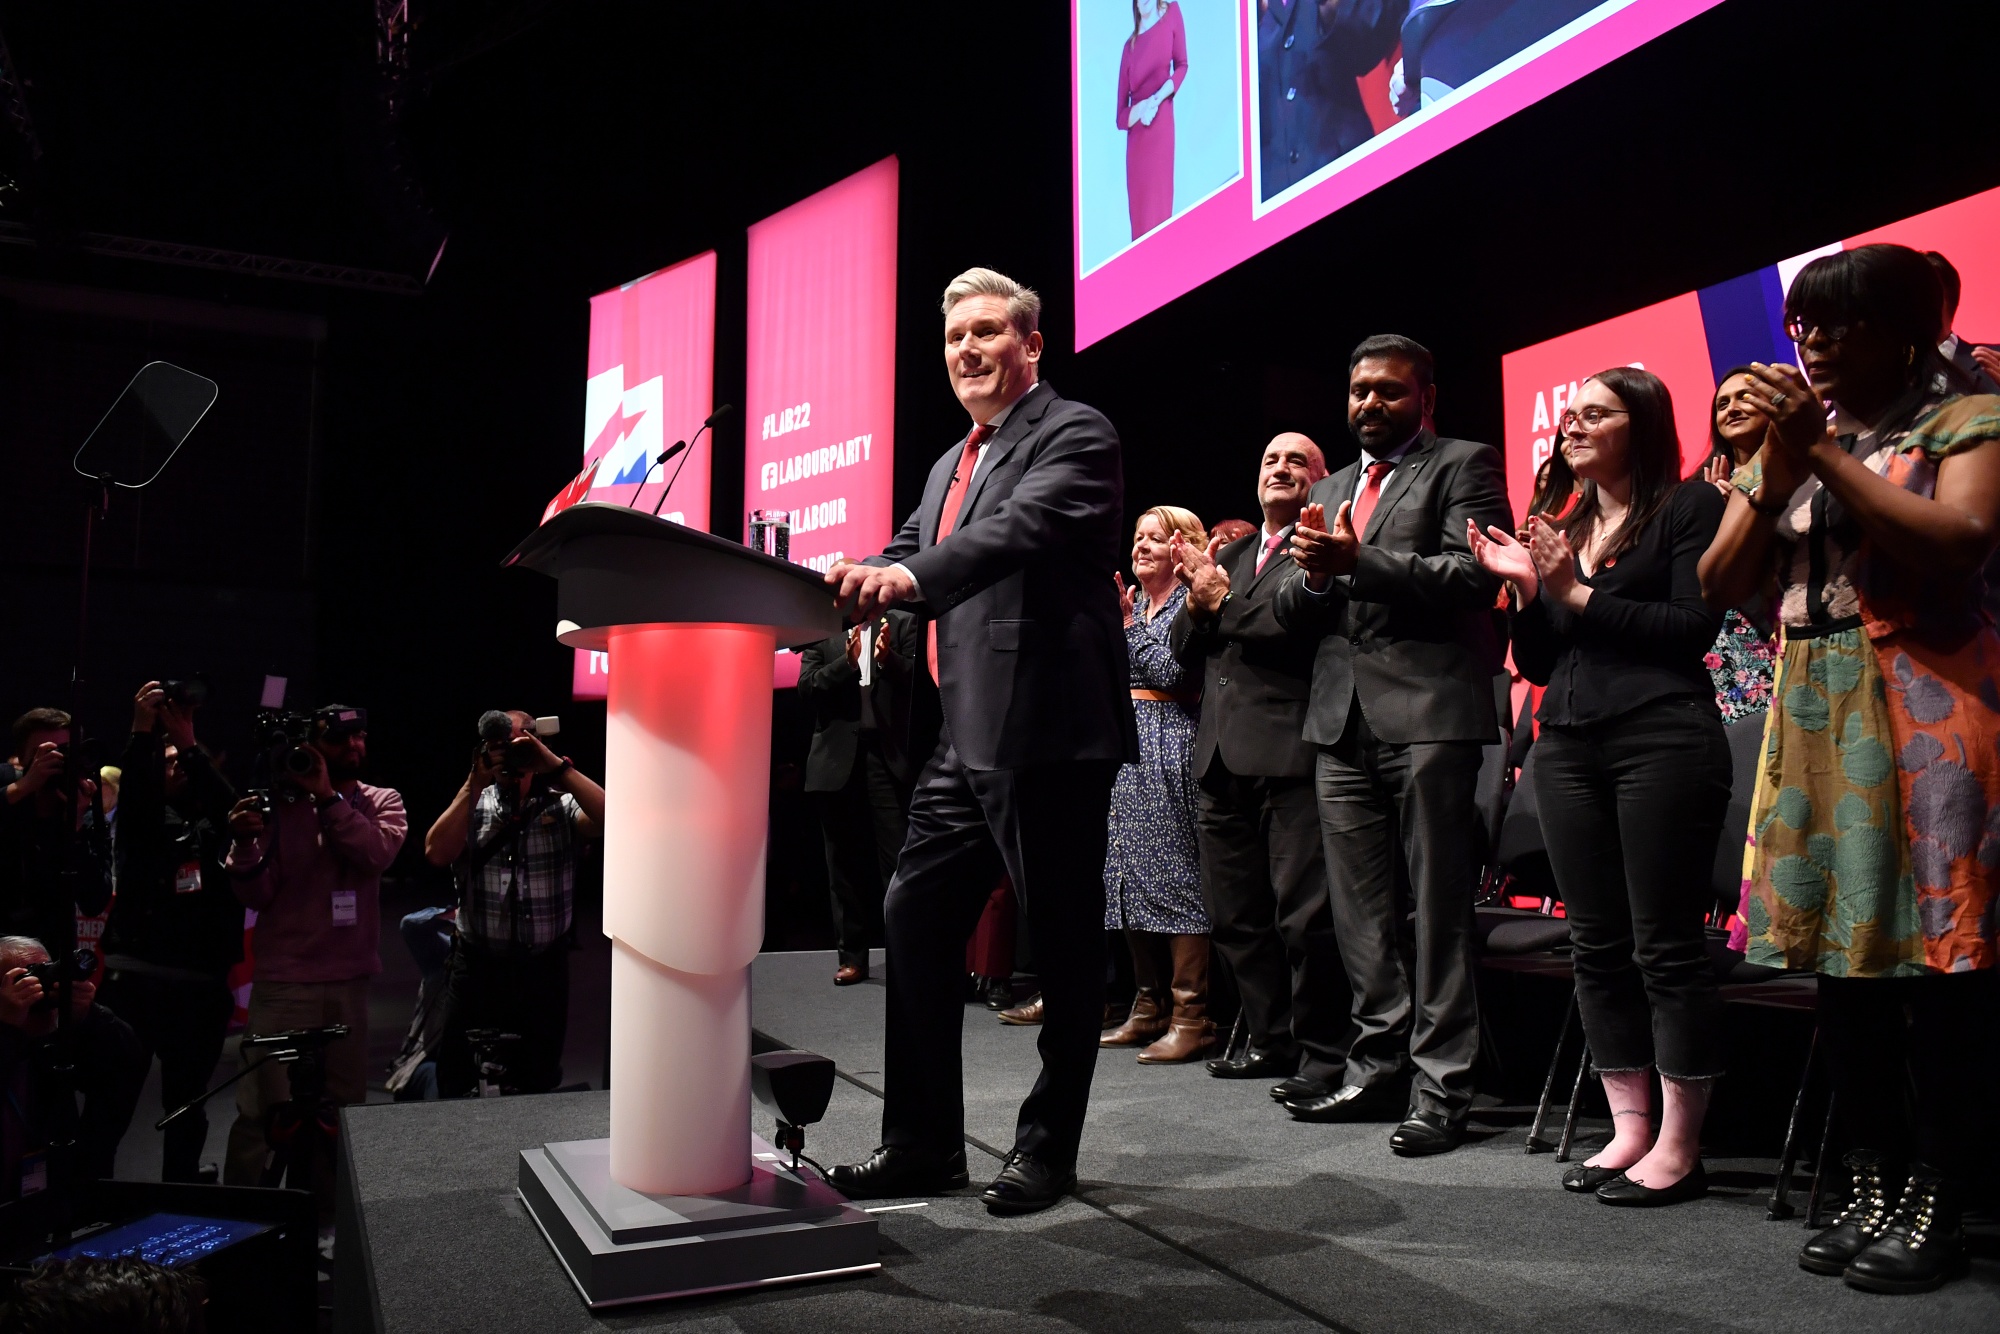 Keir Starmer delivers his keynote speech during the party's annual conference in Liverpool.